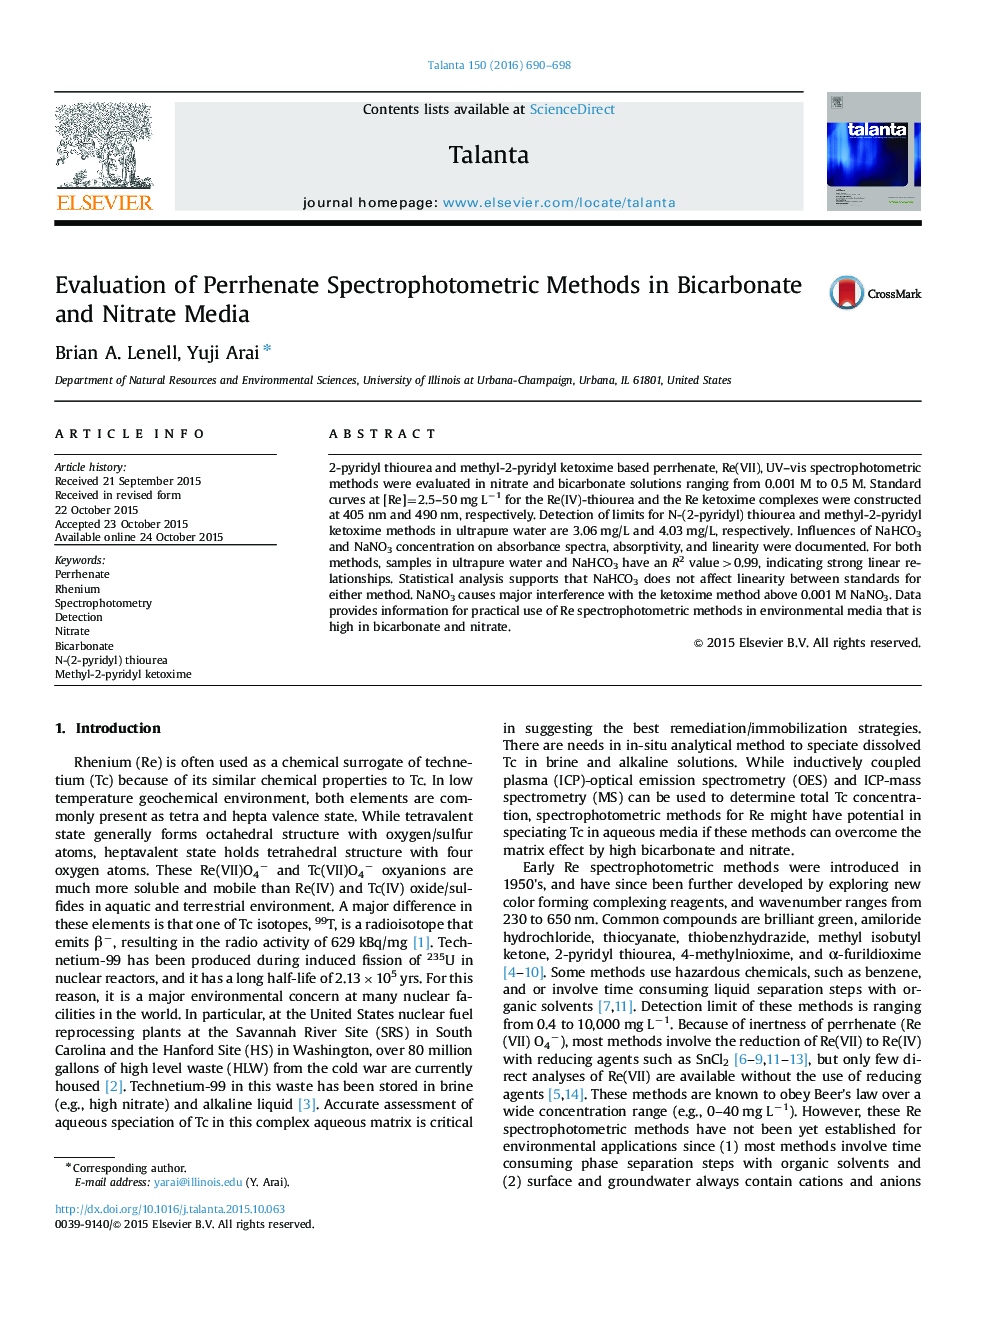 Evaluation of Perrhenate Spectrophotometric Methods in Bicarbonate and Nitrate Media